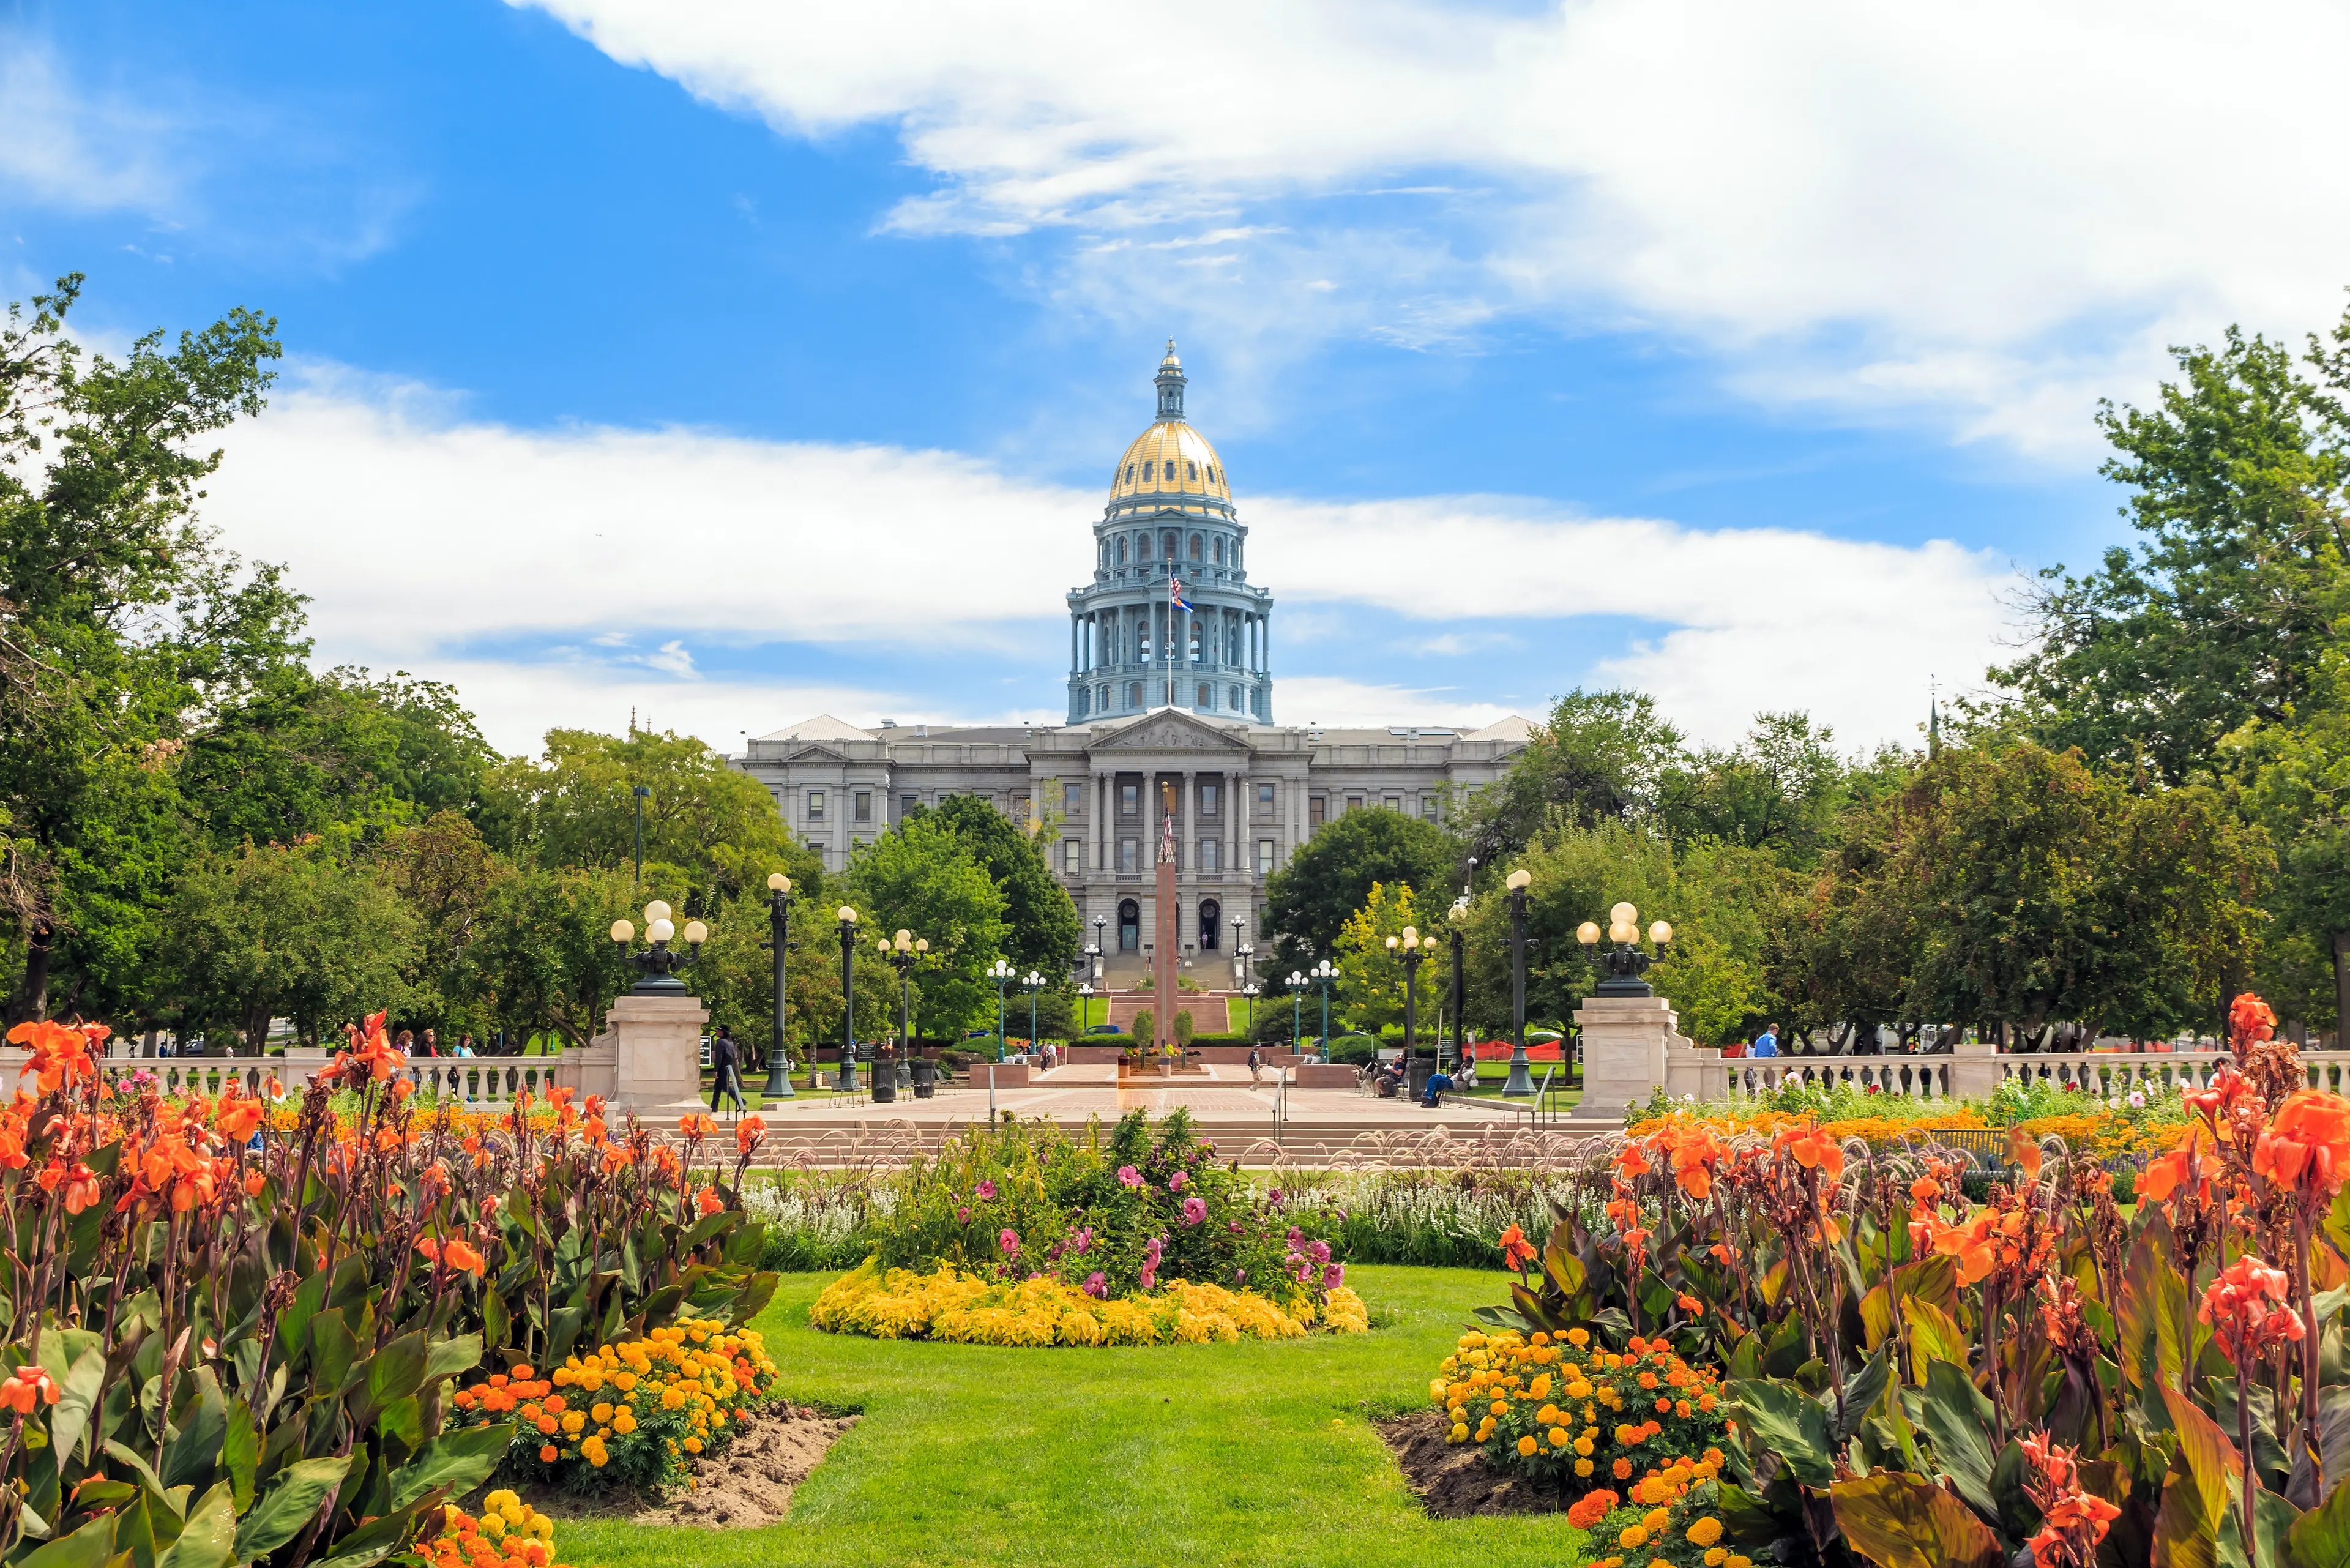 4-Day Denver Adventure and Nightlife Itinerary with Friends